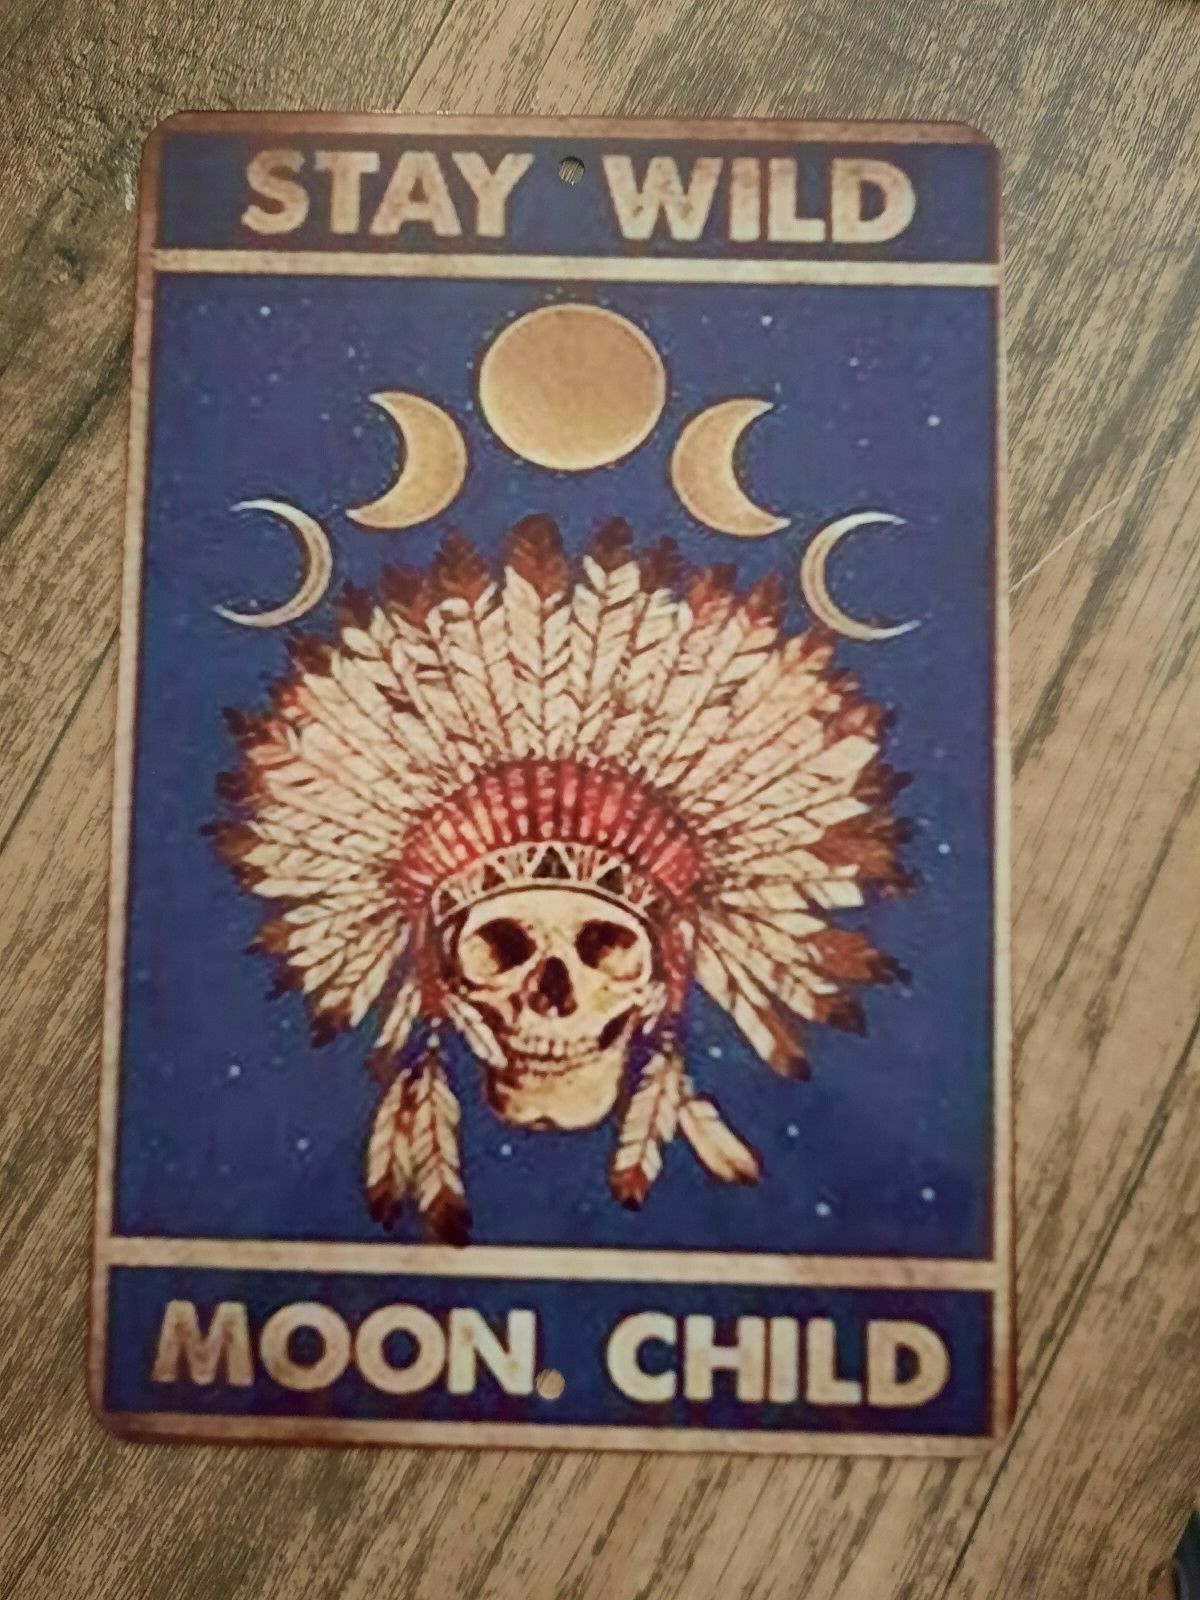 Stay Wild Moon Child Native American Skull 8x12 Metal Wall Sign